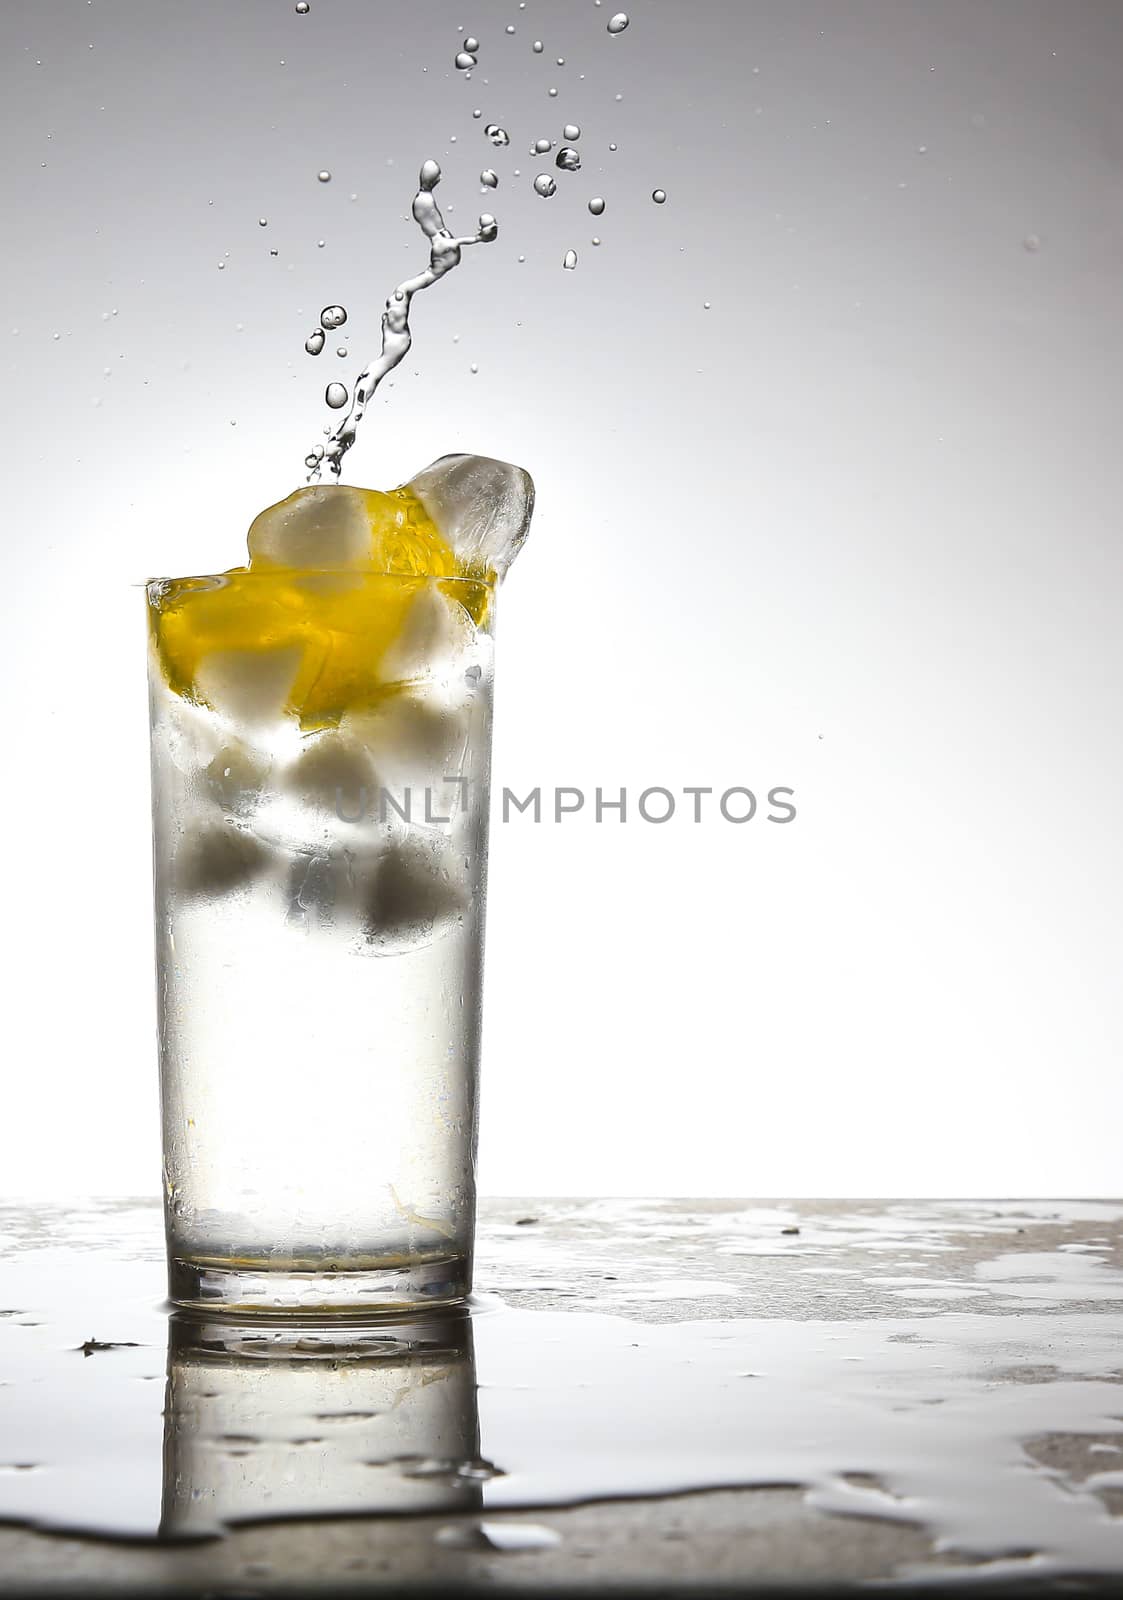 Lemon Juice and ice cubes by chuckyq1